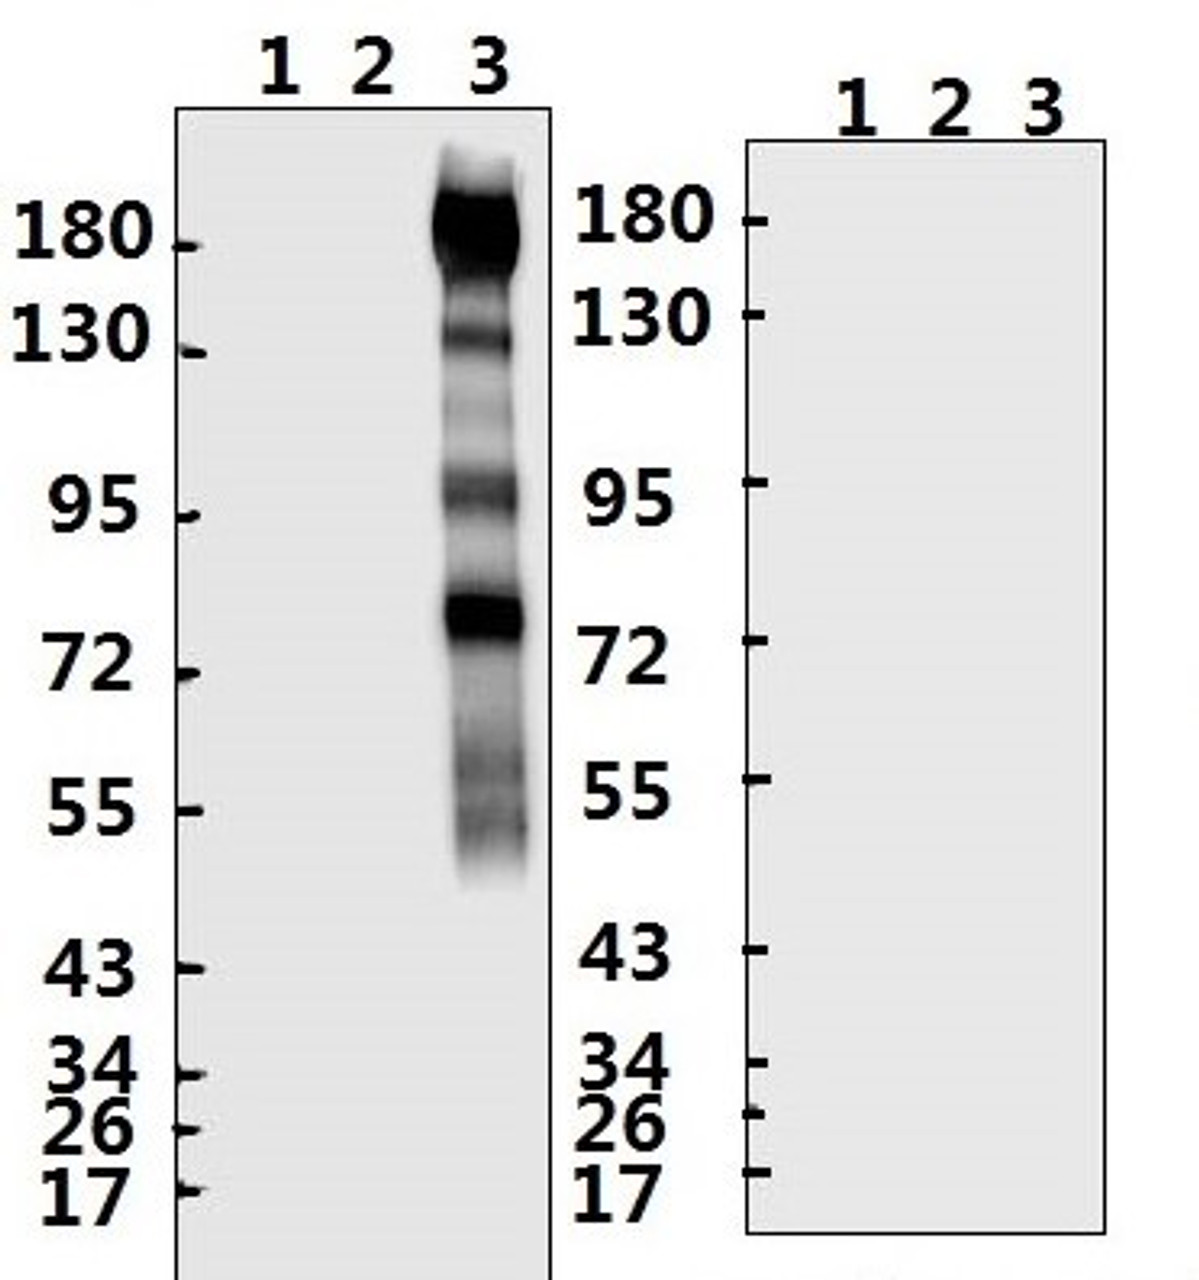 <strong>Figure 1 Western Blot Validation with Recombinant Protein</strong><br>Loading: 1ug of recombinant protein per lane. Lane 1: 10-007, Lane 2: 10-008 and Lane 3: 10-011. Antibodies: SARS-CoV-2 (COVID-19) Spike S2, 10-527, 1:500. Secondary: Goat anti-rabbit IgG HRP conjugate at 1:20000 dilution.